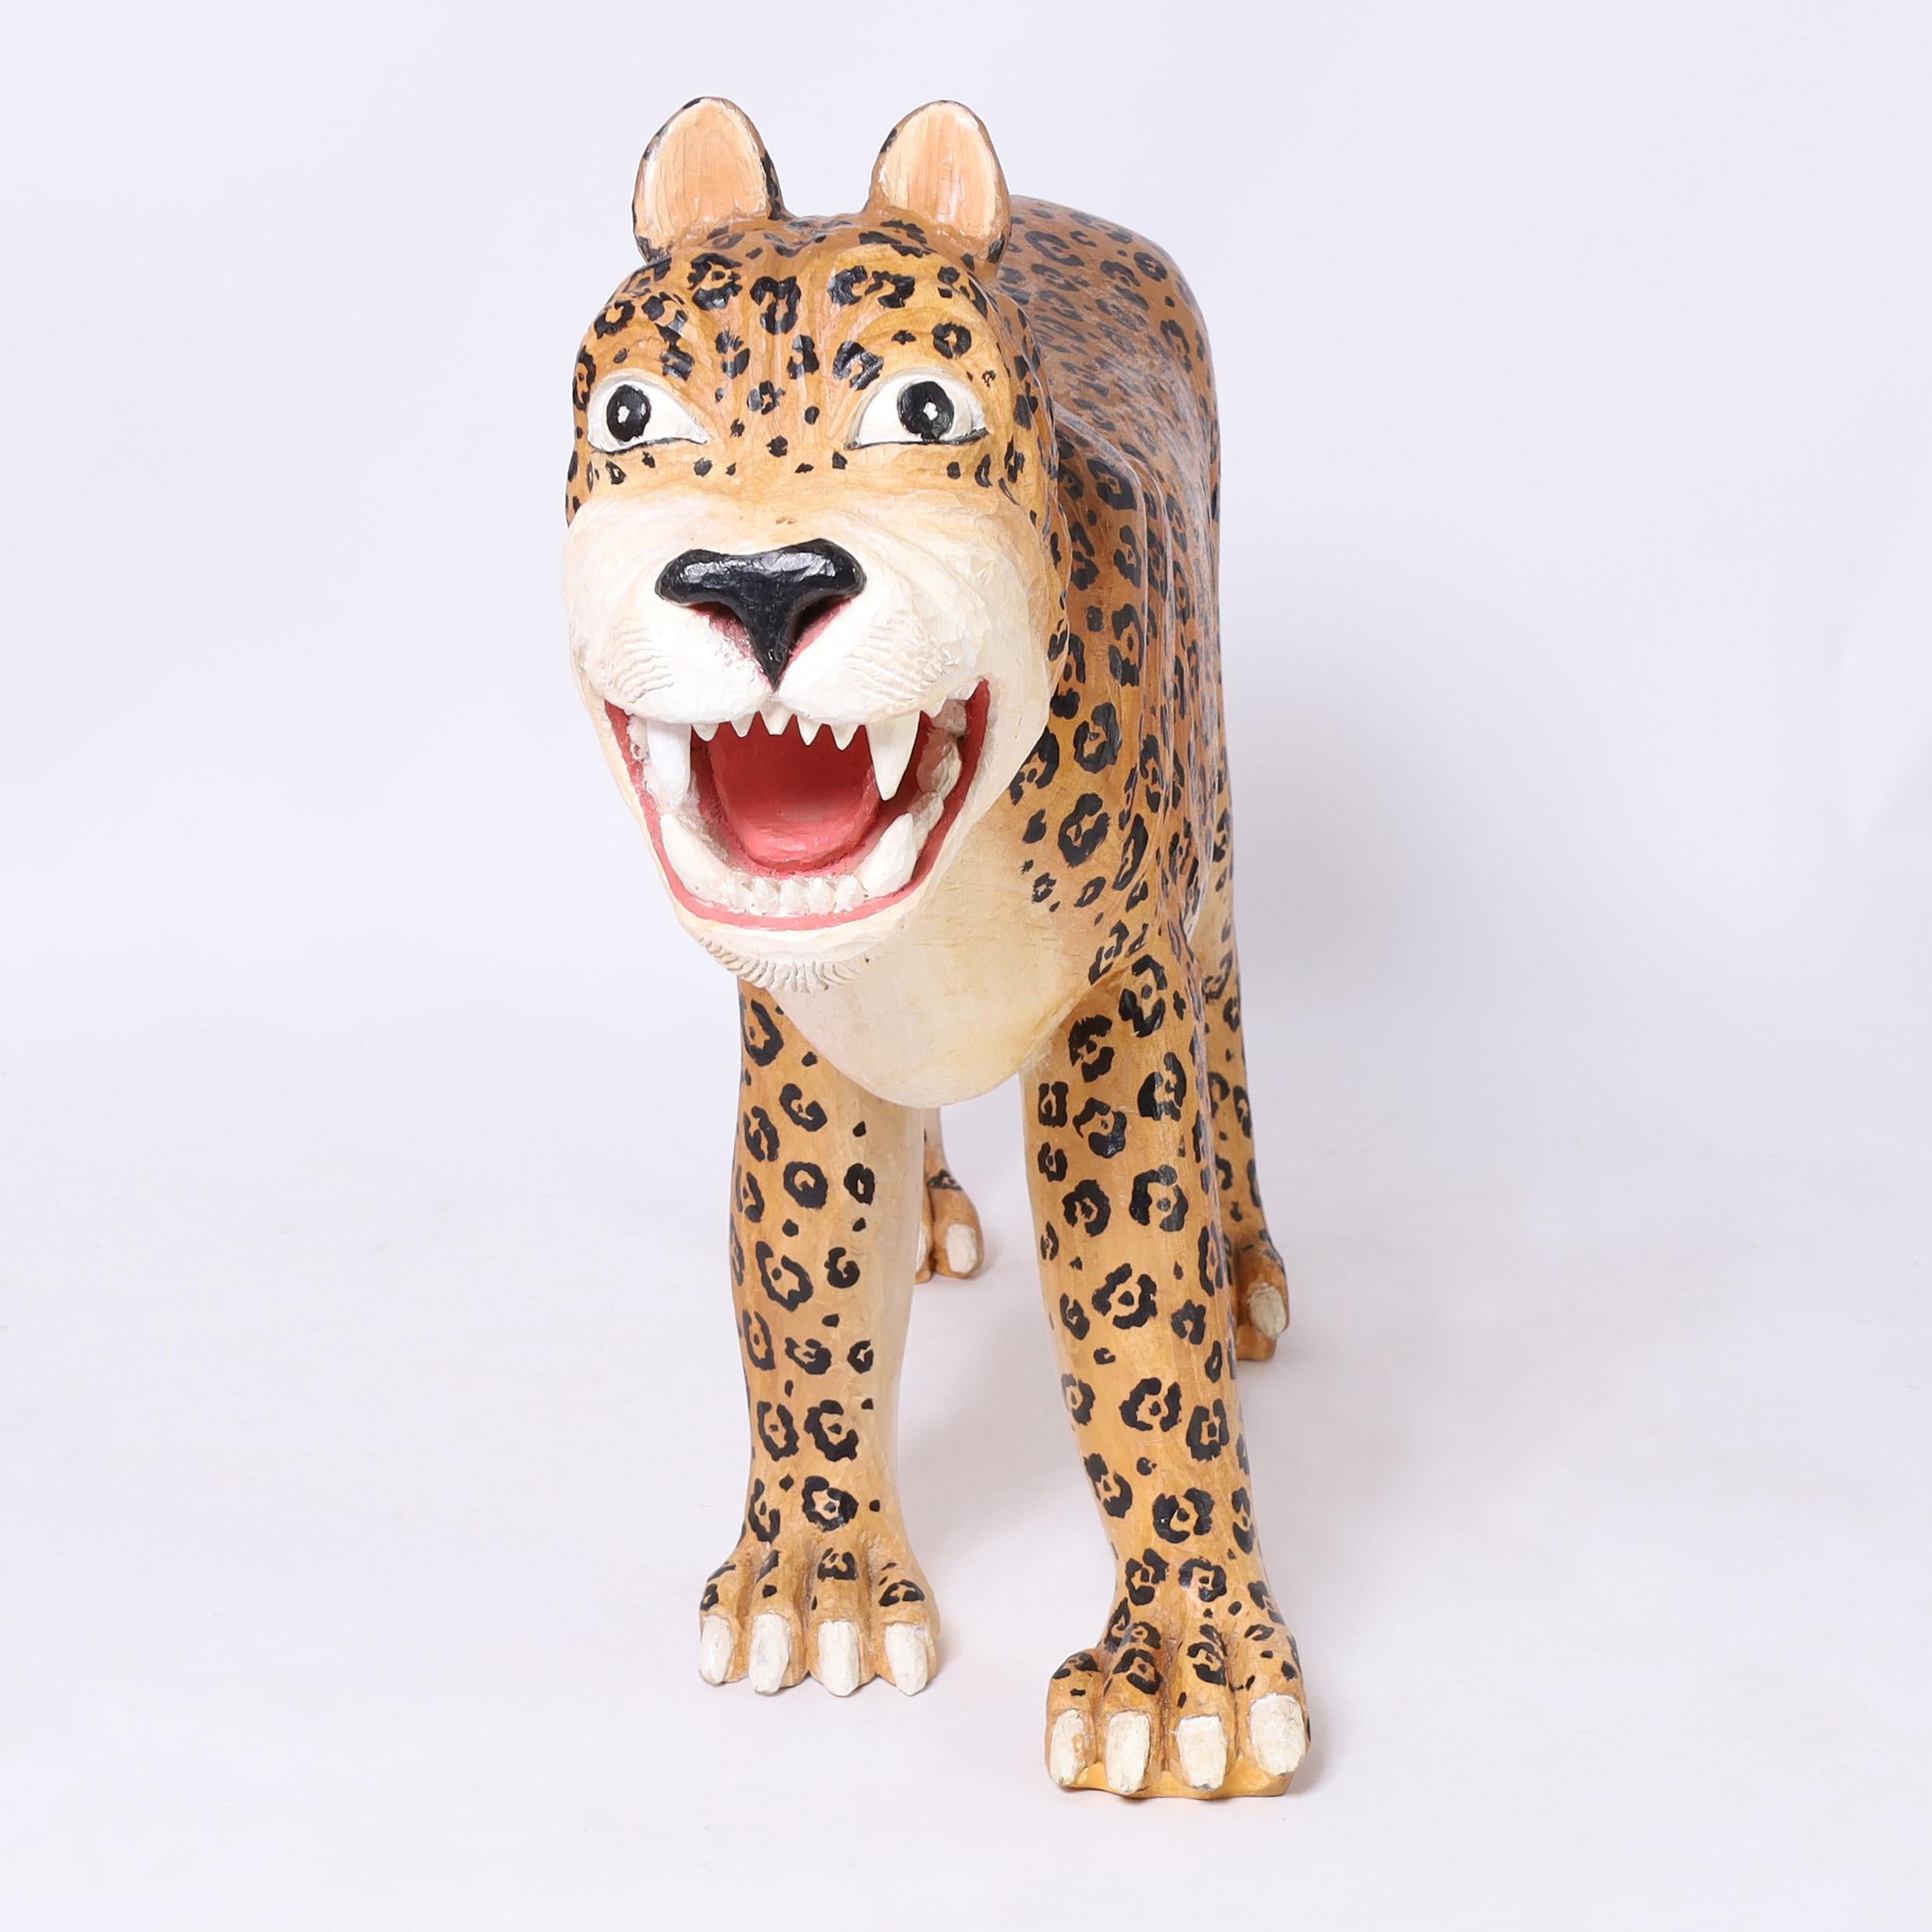 Carved and Painted Wood Jaguar or Big Cat - Folk Art Sculpture by Unknown